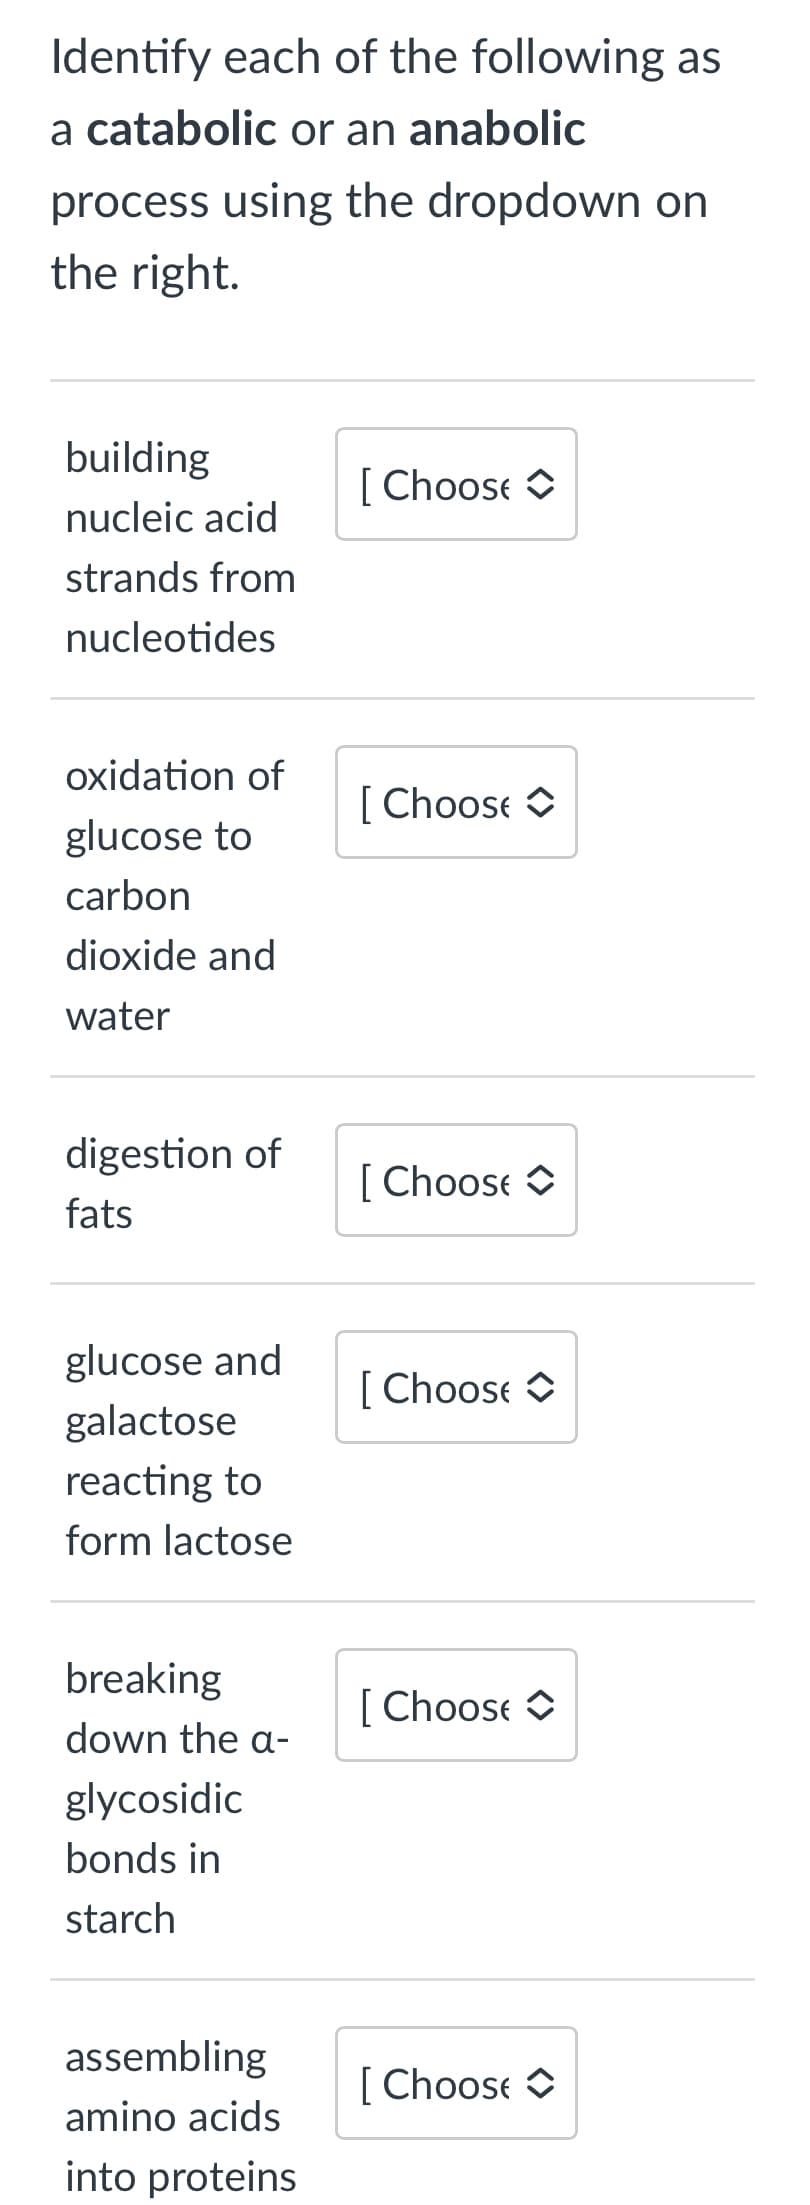 Identify each of the following as
a catabolic or an anabolic
process using the dropdown on
the right.
building
nucleic acid
strands from
nucleotides
oxidation of
glucose to
carbon
dioxide and
water
digestion of
fats
glucose and
galactose
reacting to
form lactose
breaking
down the a-
glycosidic
bonds in
starch
assembling
amino acids
into proteins
[Choose
[Choose
[Choose
[Choose
[Choose
[ Choose